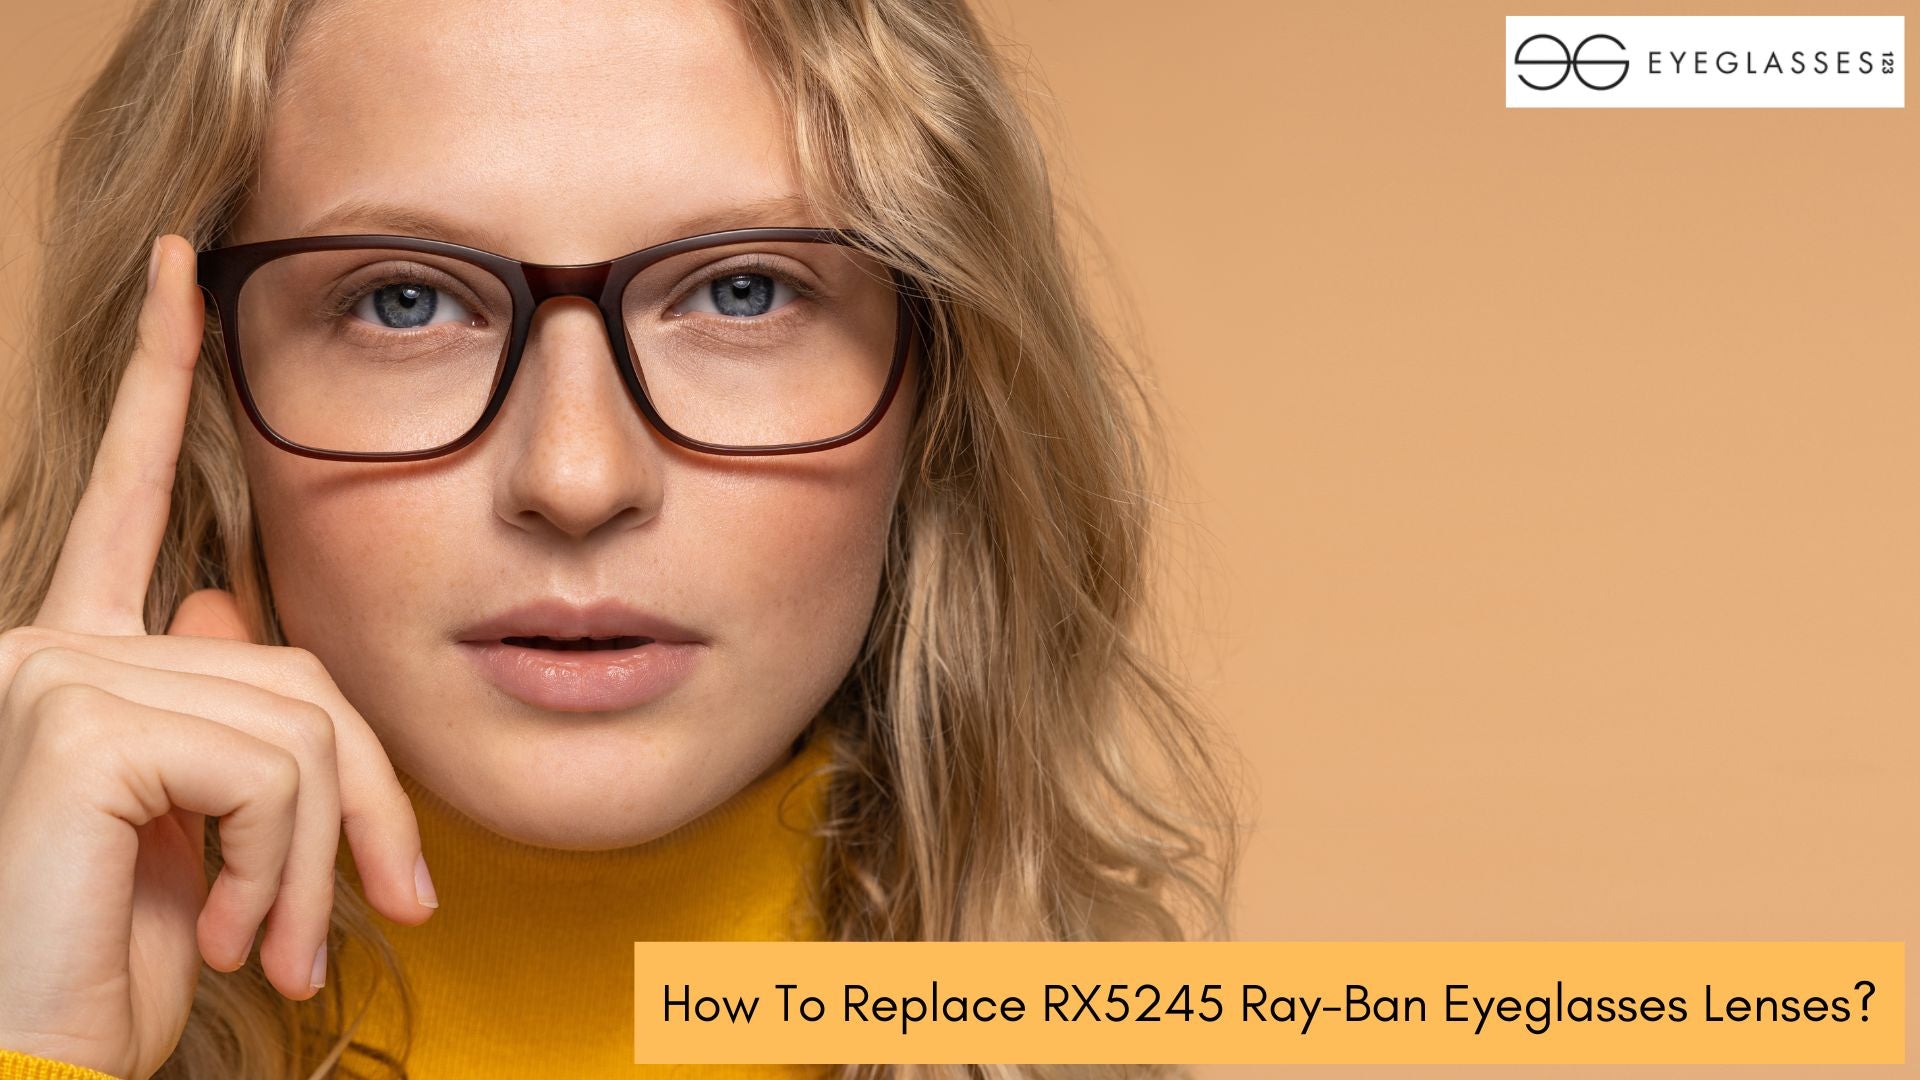 How To Replace RX5245 Ray-Ban Eyeglasses Lenses?